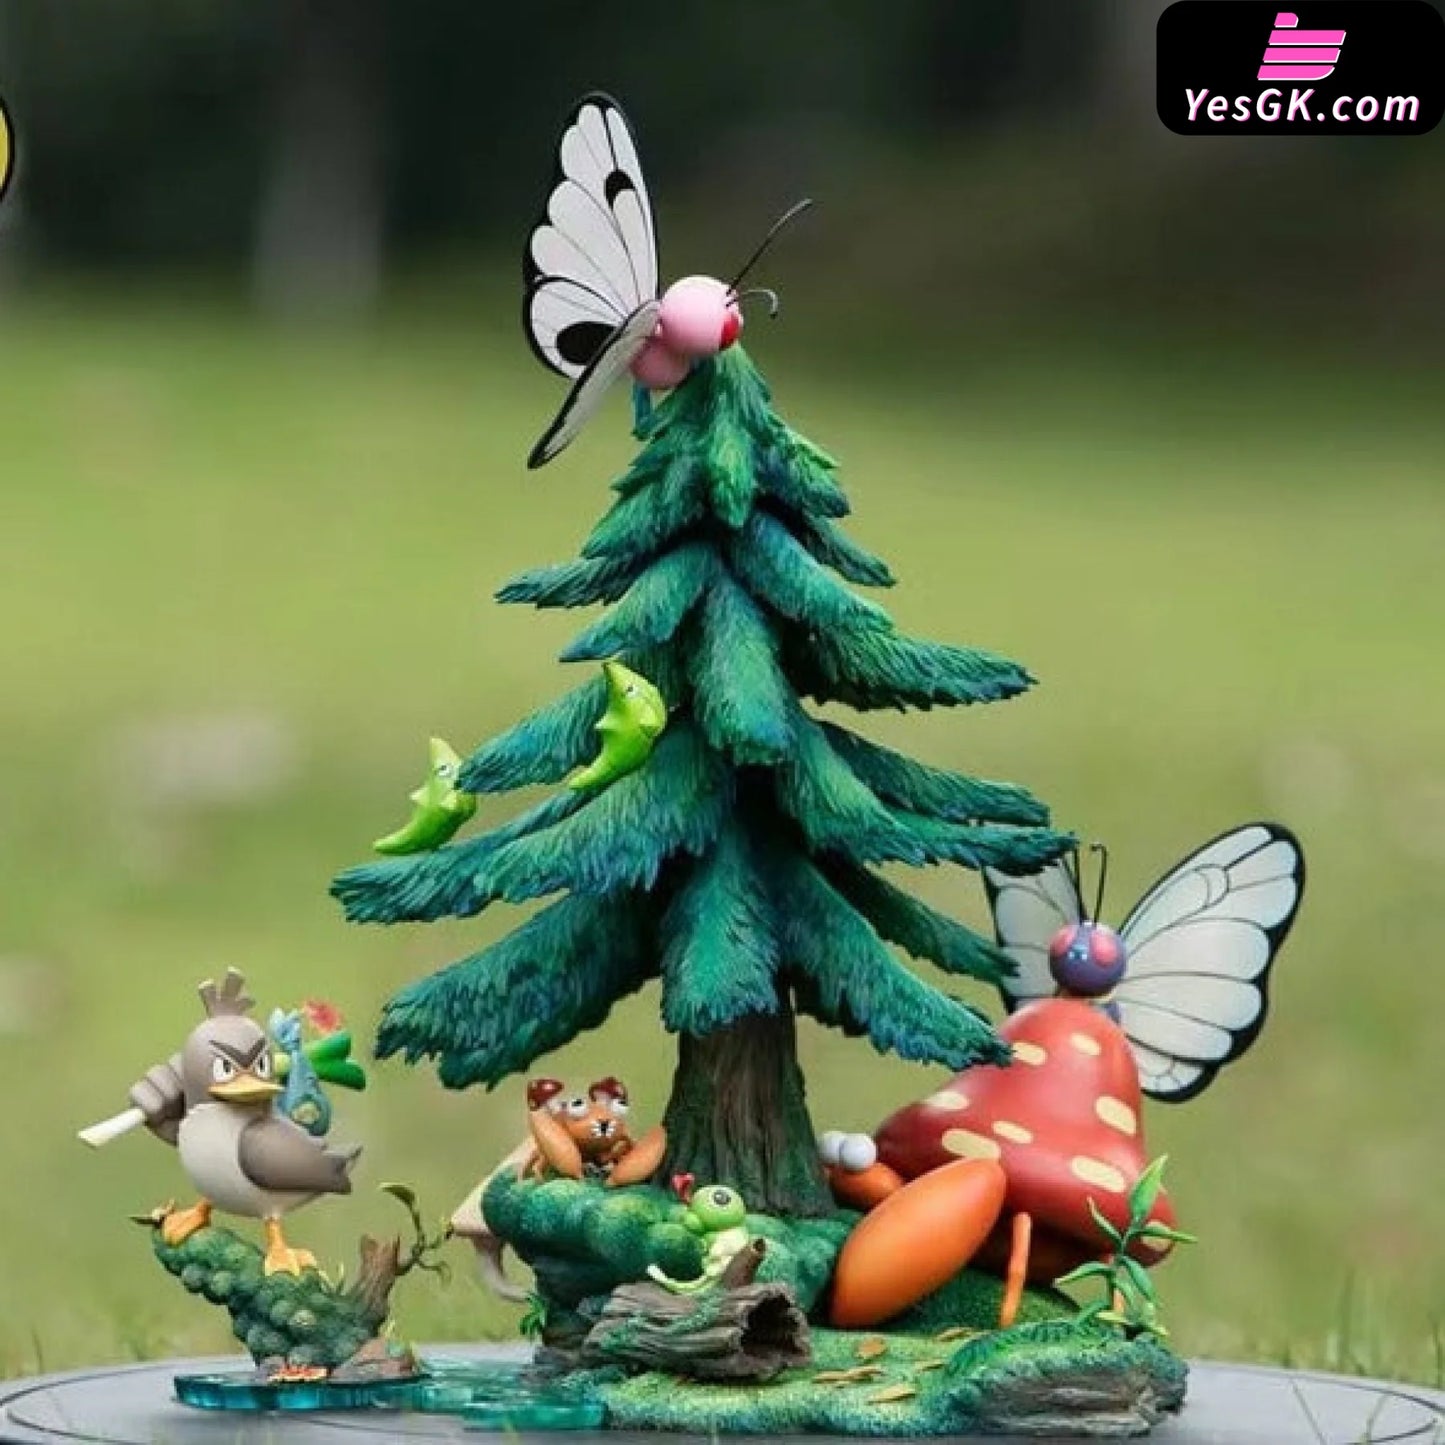 Pokémon Natural Forest Series #1 Butterfree & Parasect Family Resin Statue - Moon Shadow Studio [In